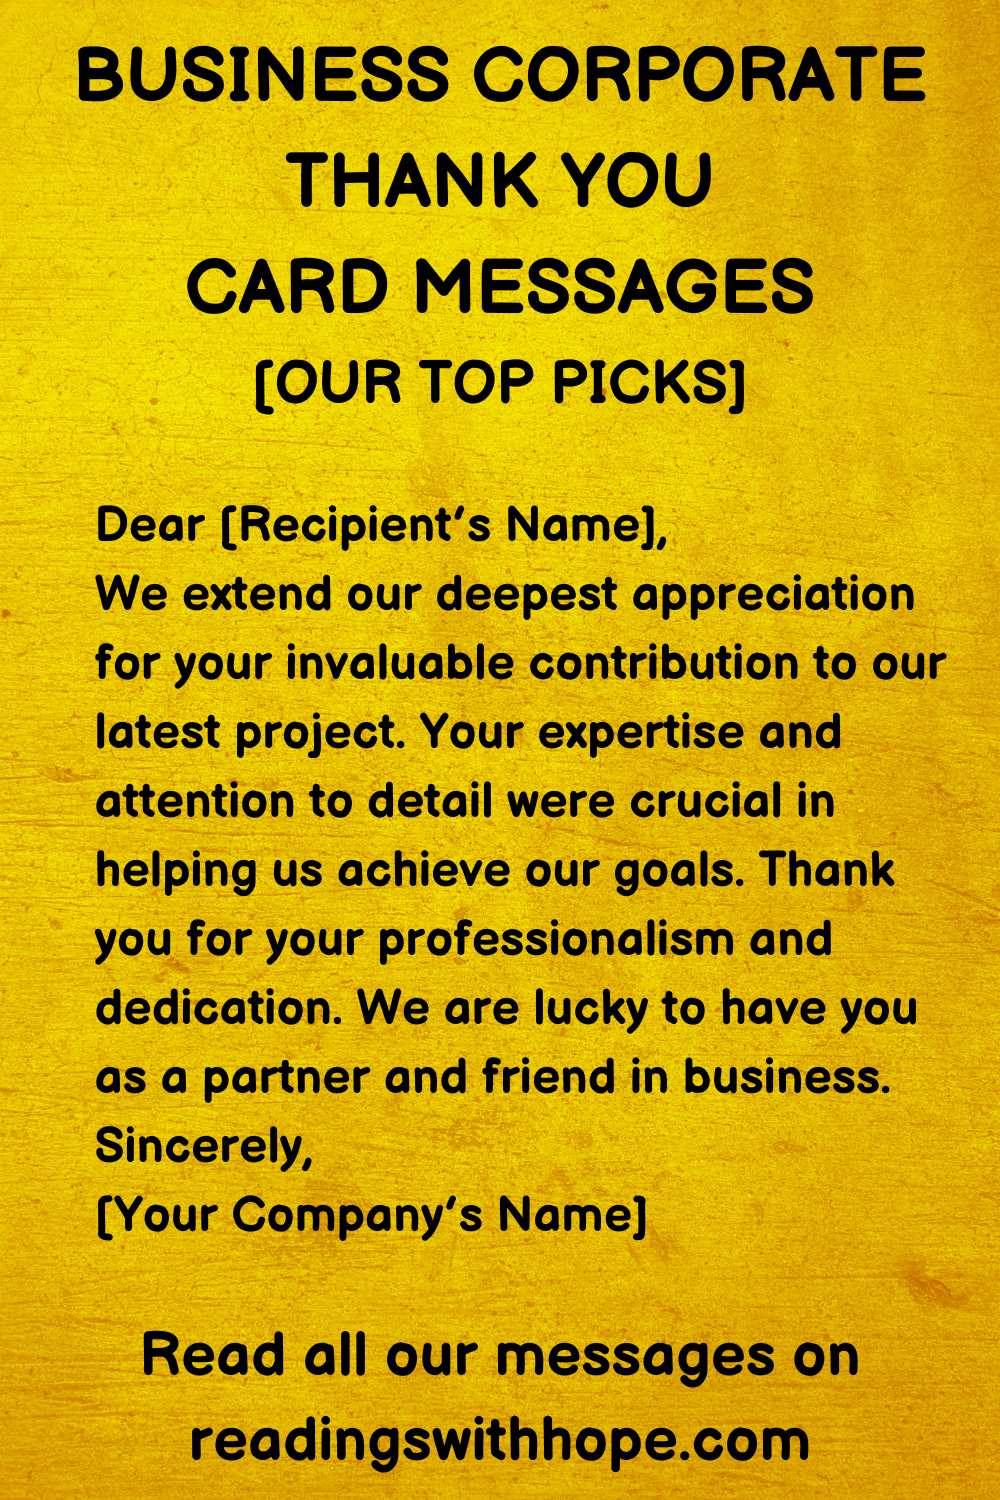 Best Business Corporate Thank You Card Messages
